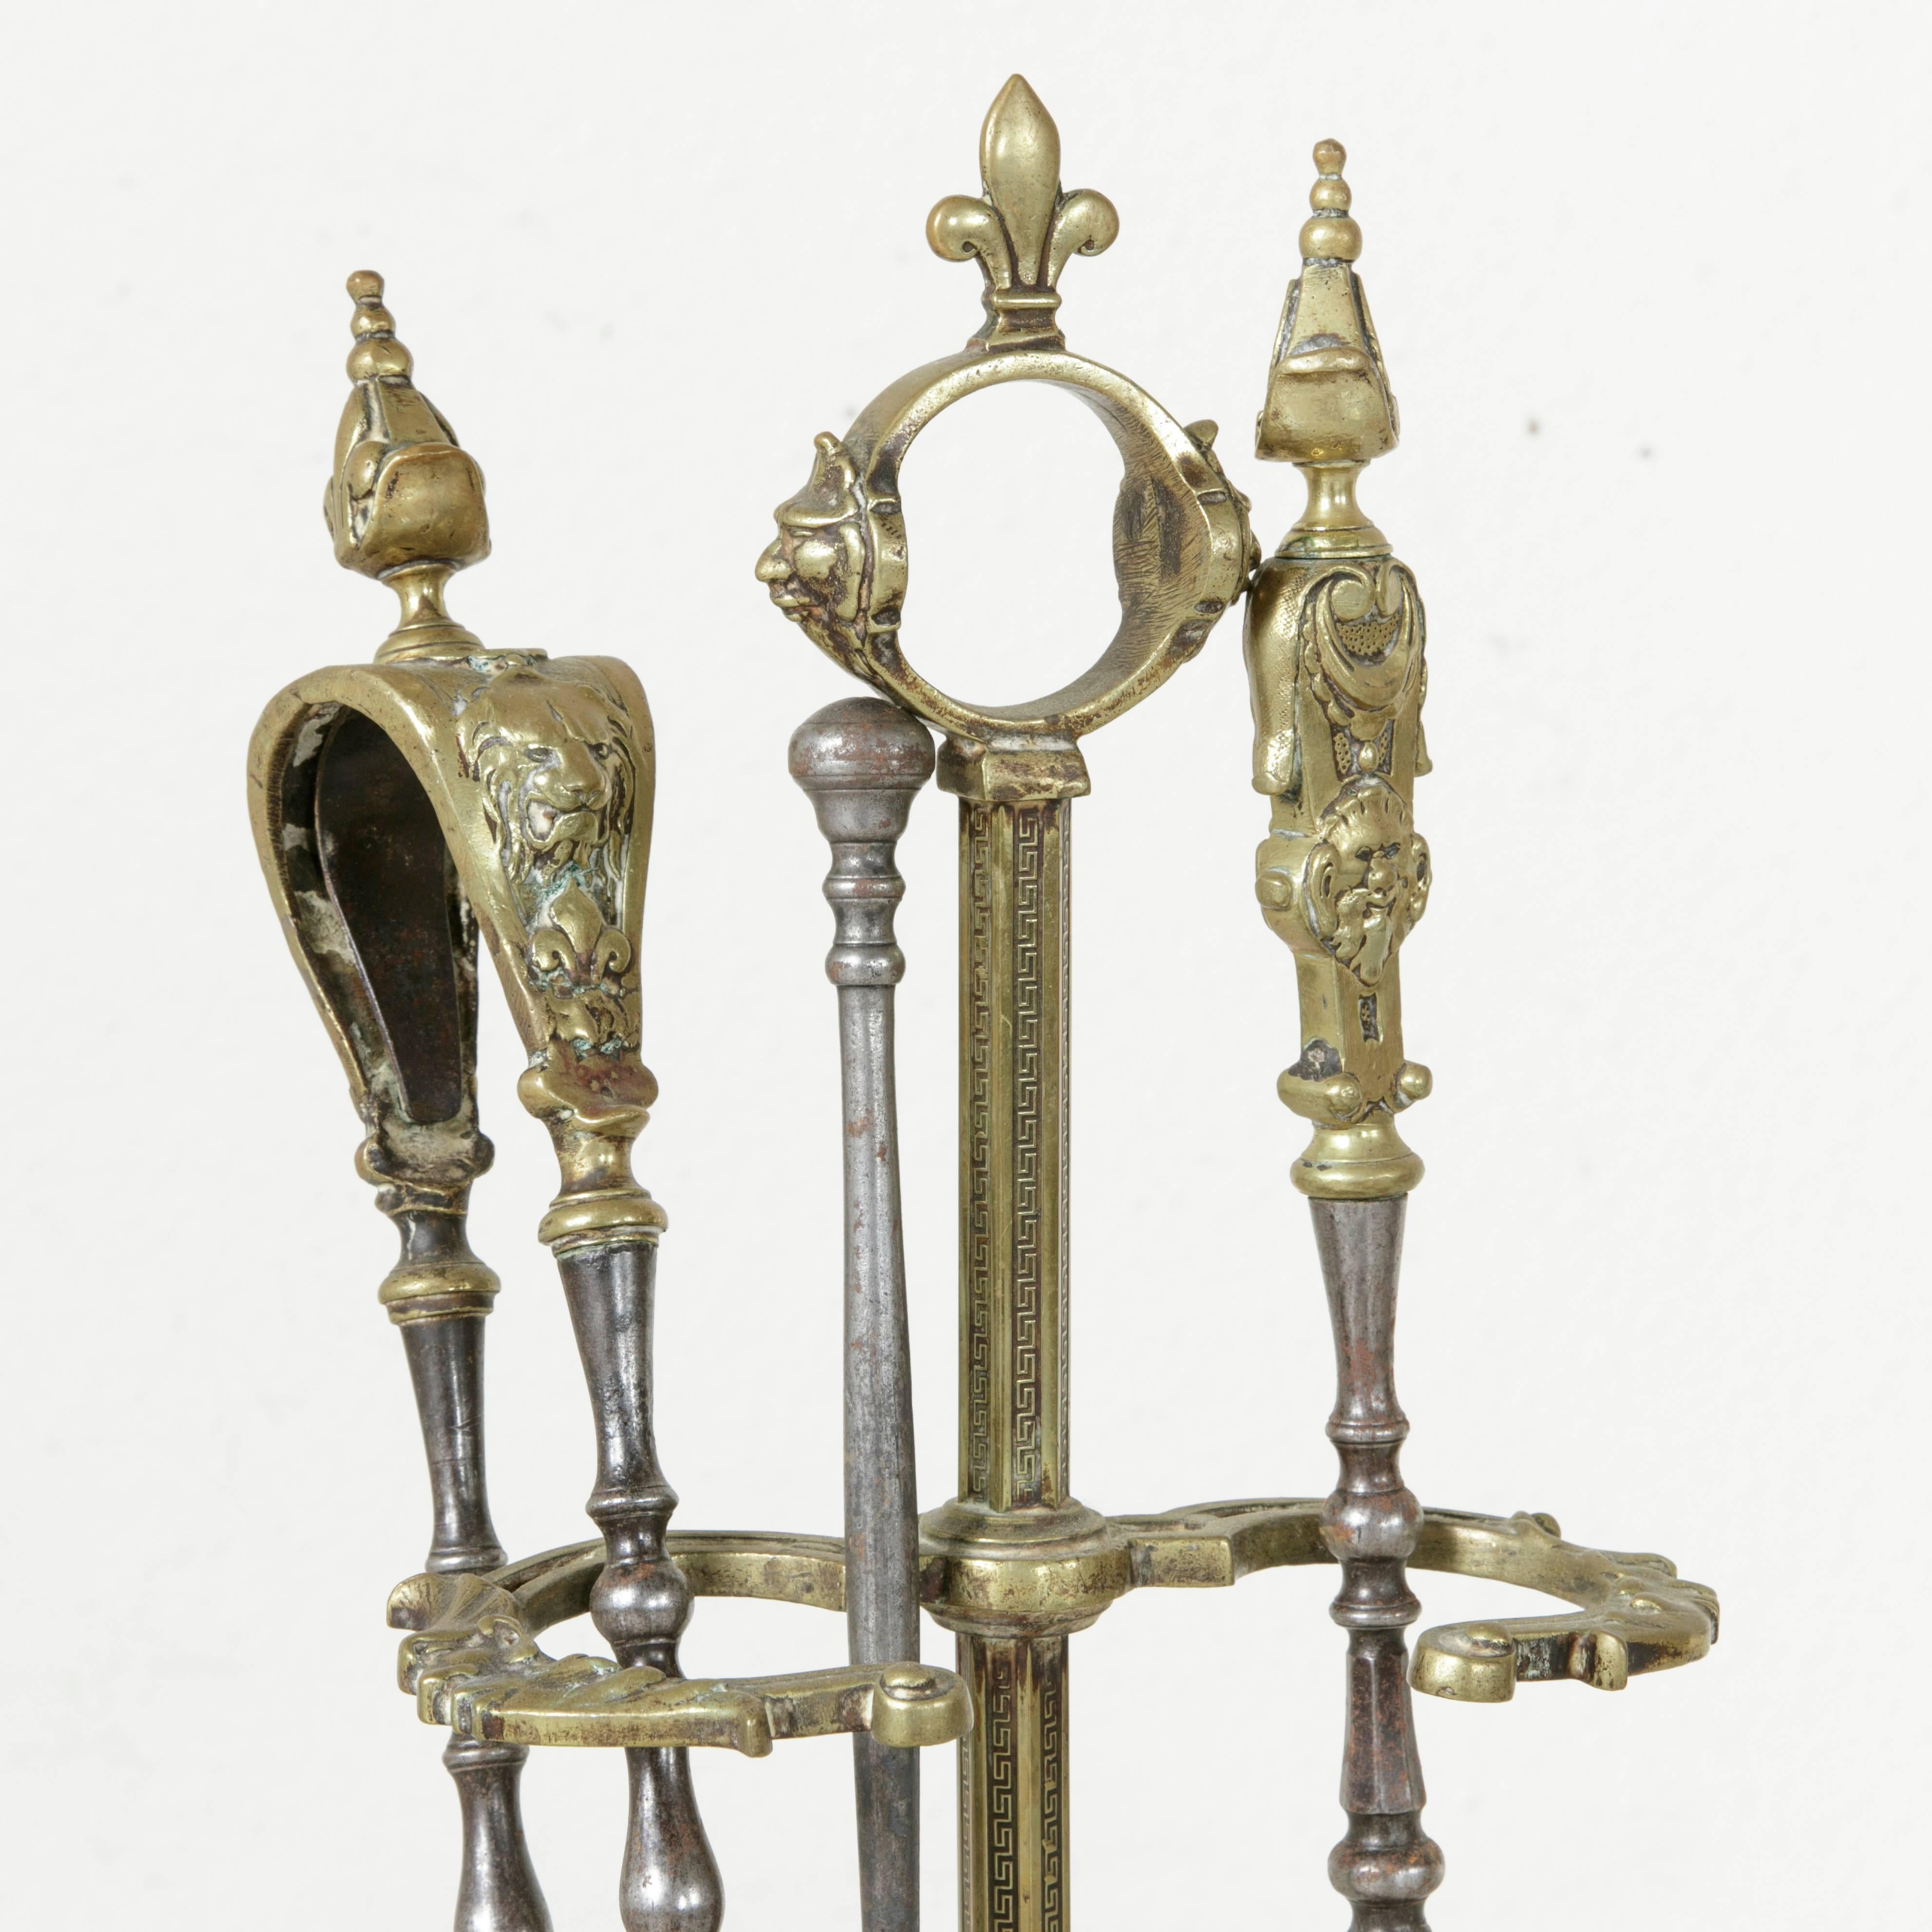 This set of late 19th century bronze fireplace tools is complete with a stand, poker, shovel, and tongs. The stand features a heptagon shaped base with detailing of a leaf surrounded by scrolling. Bands in a Greek key pattern run the length of the